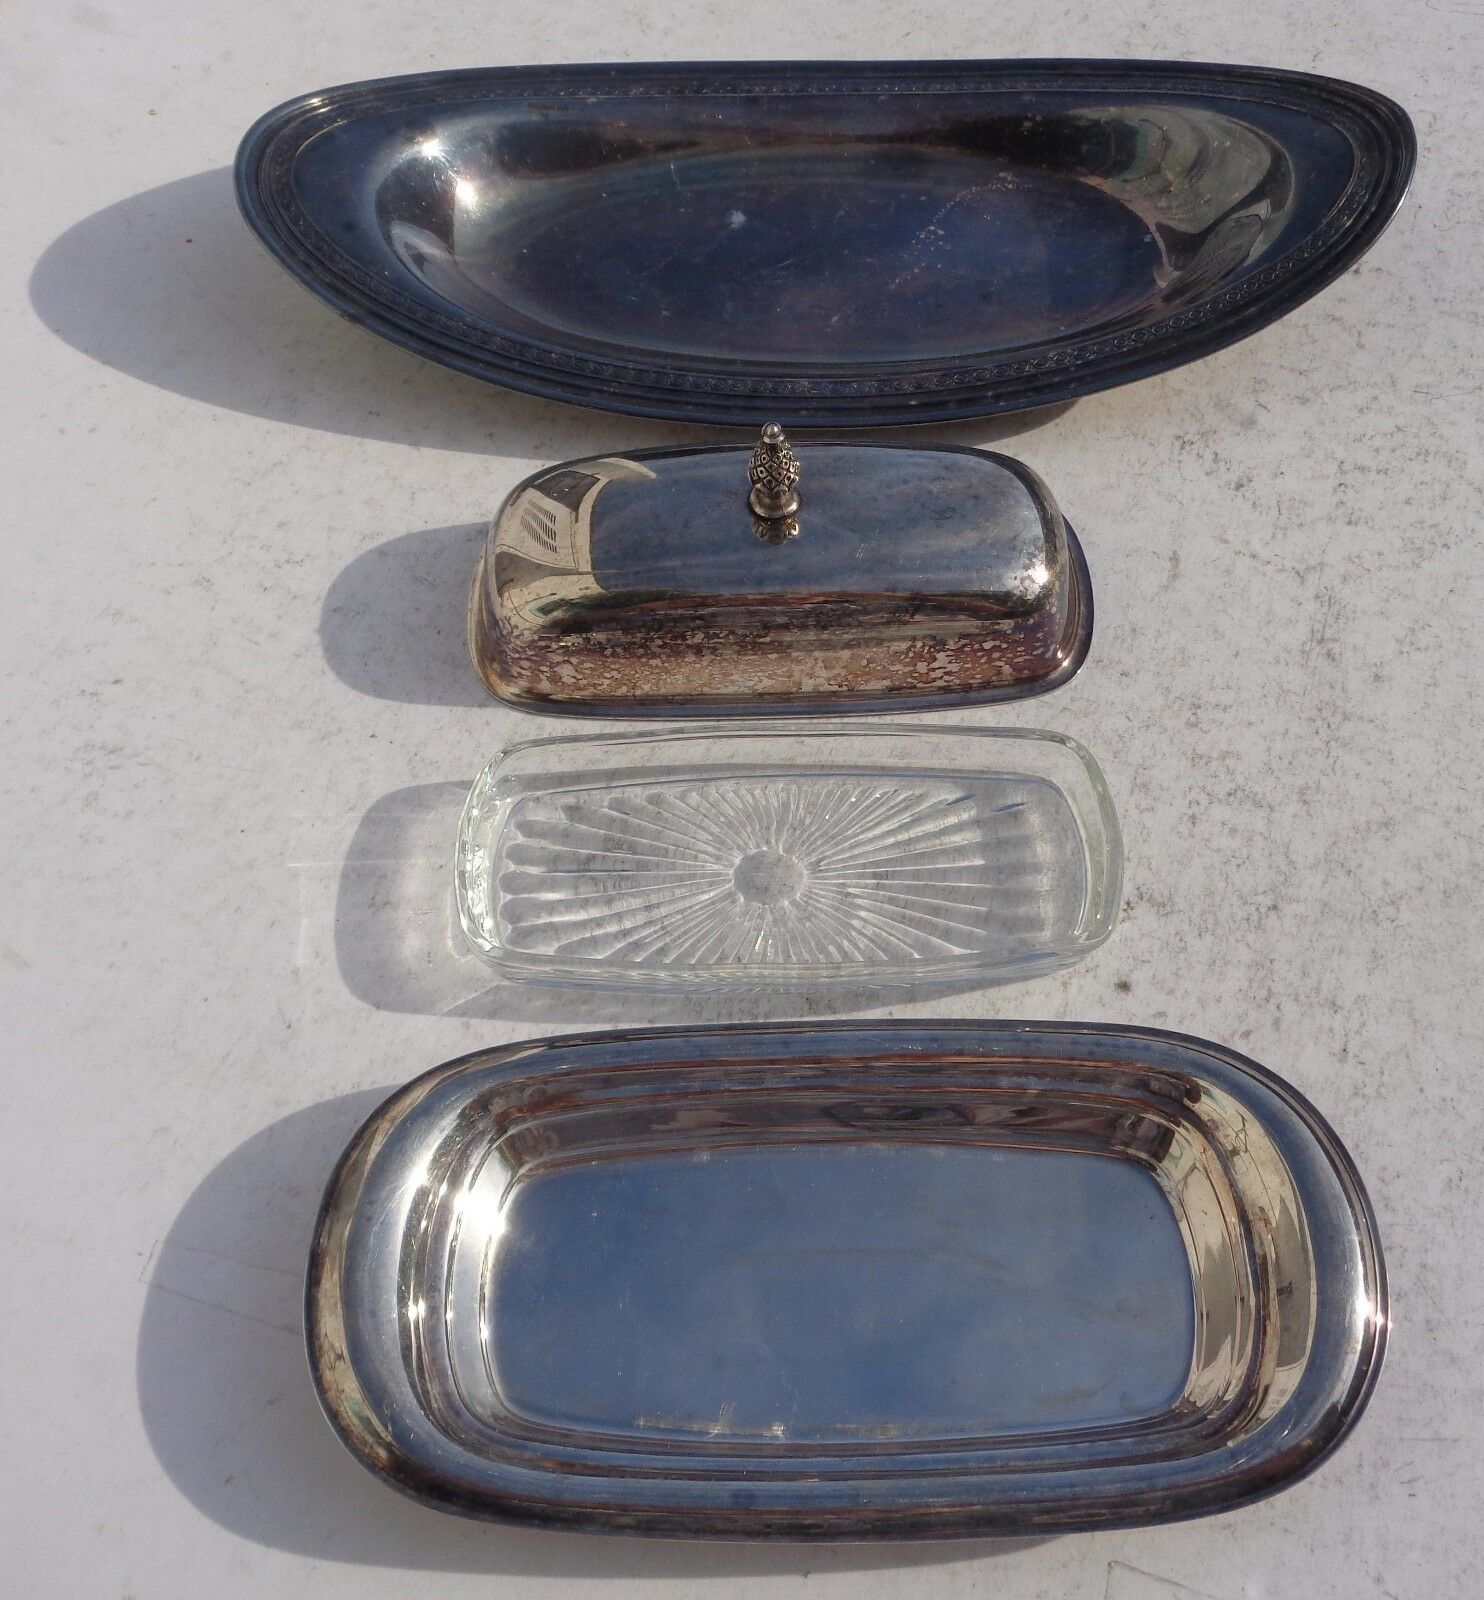 Bread Tray And Covered Butter Dish Set W Glass Rogers Amsterdam Silverplate